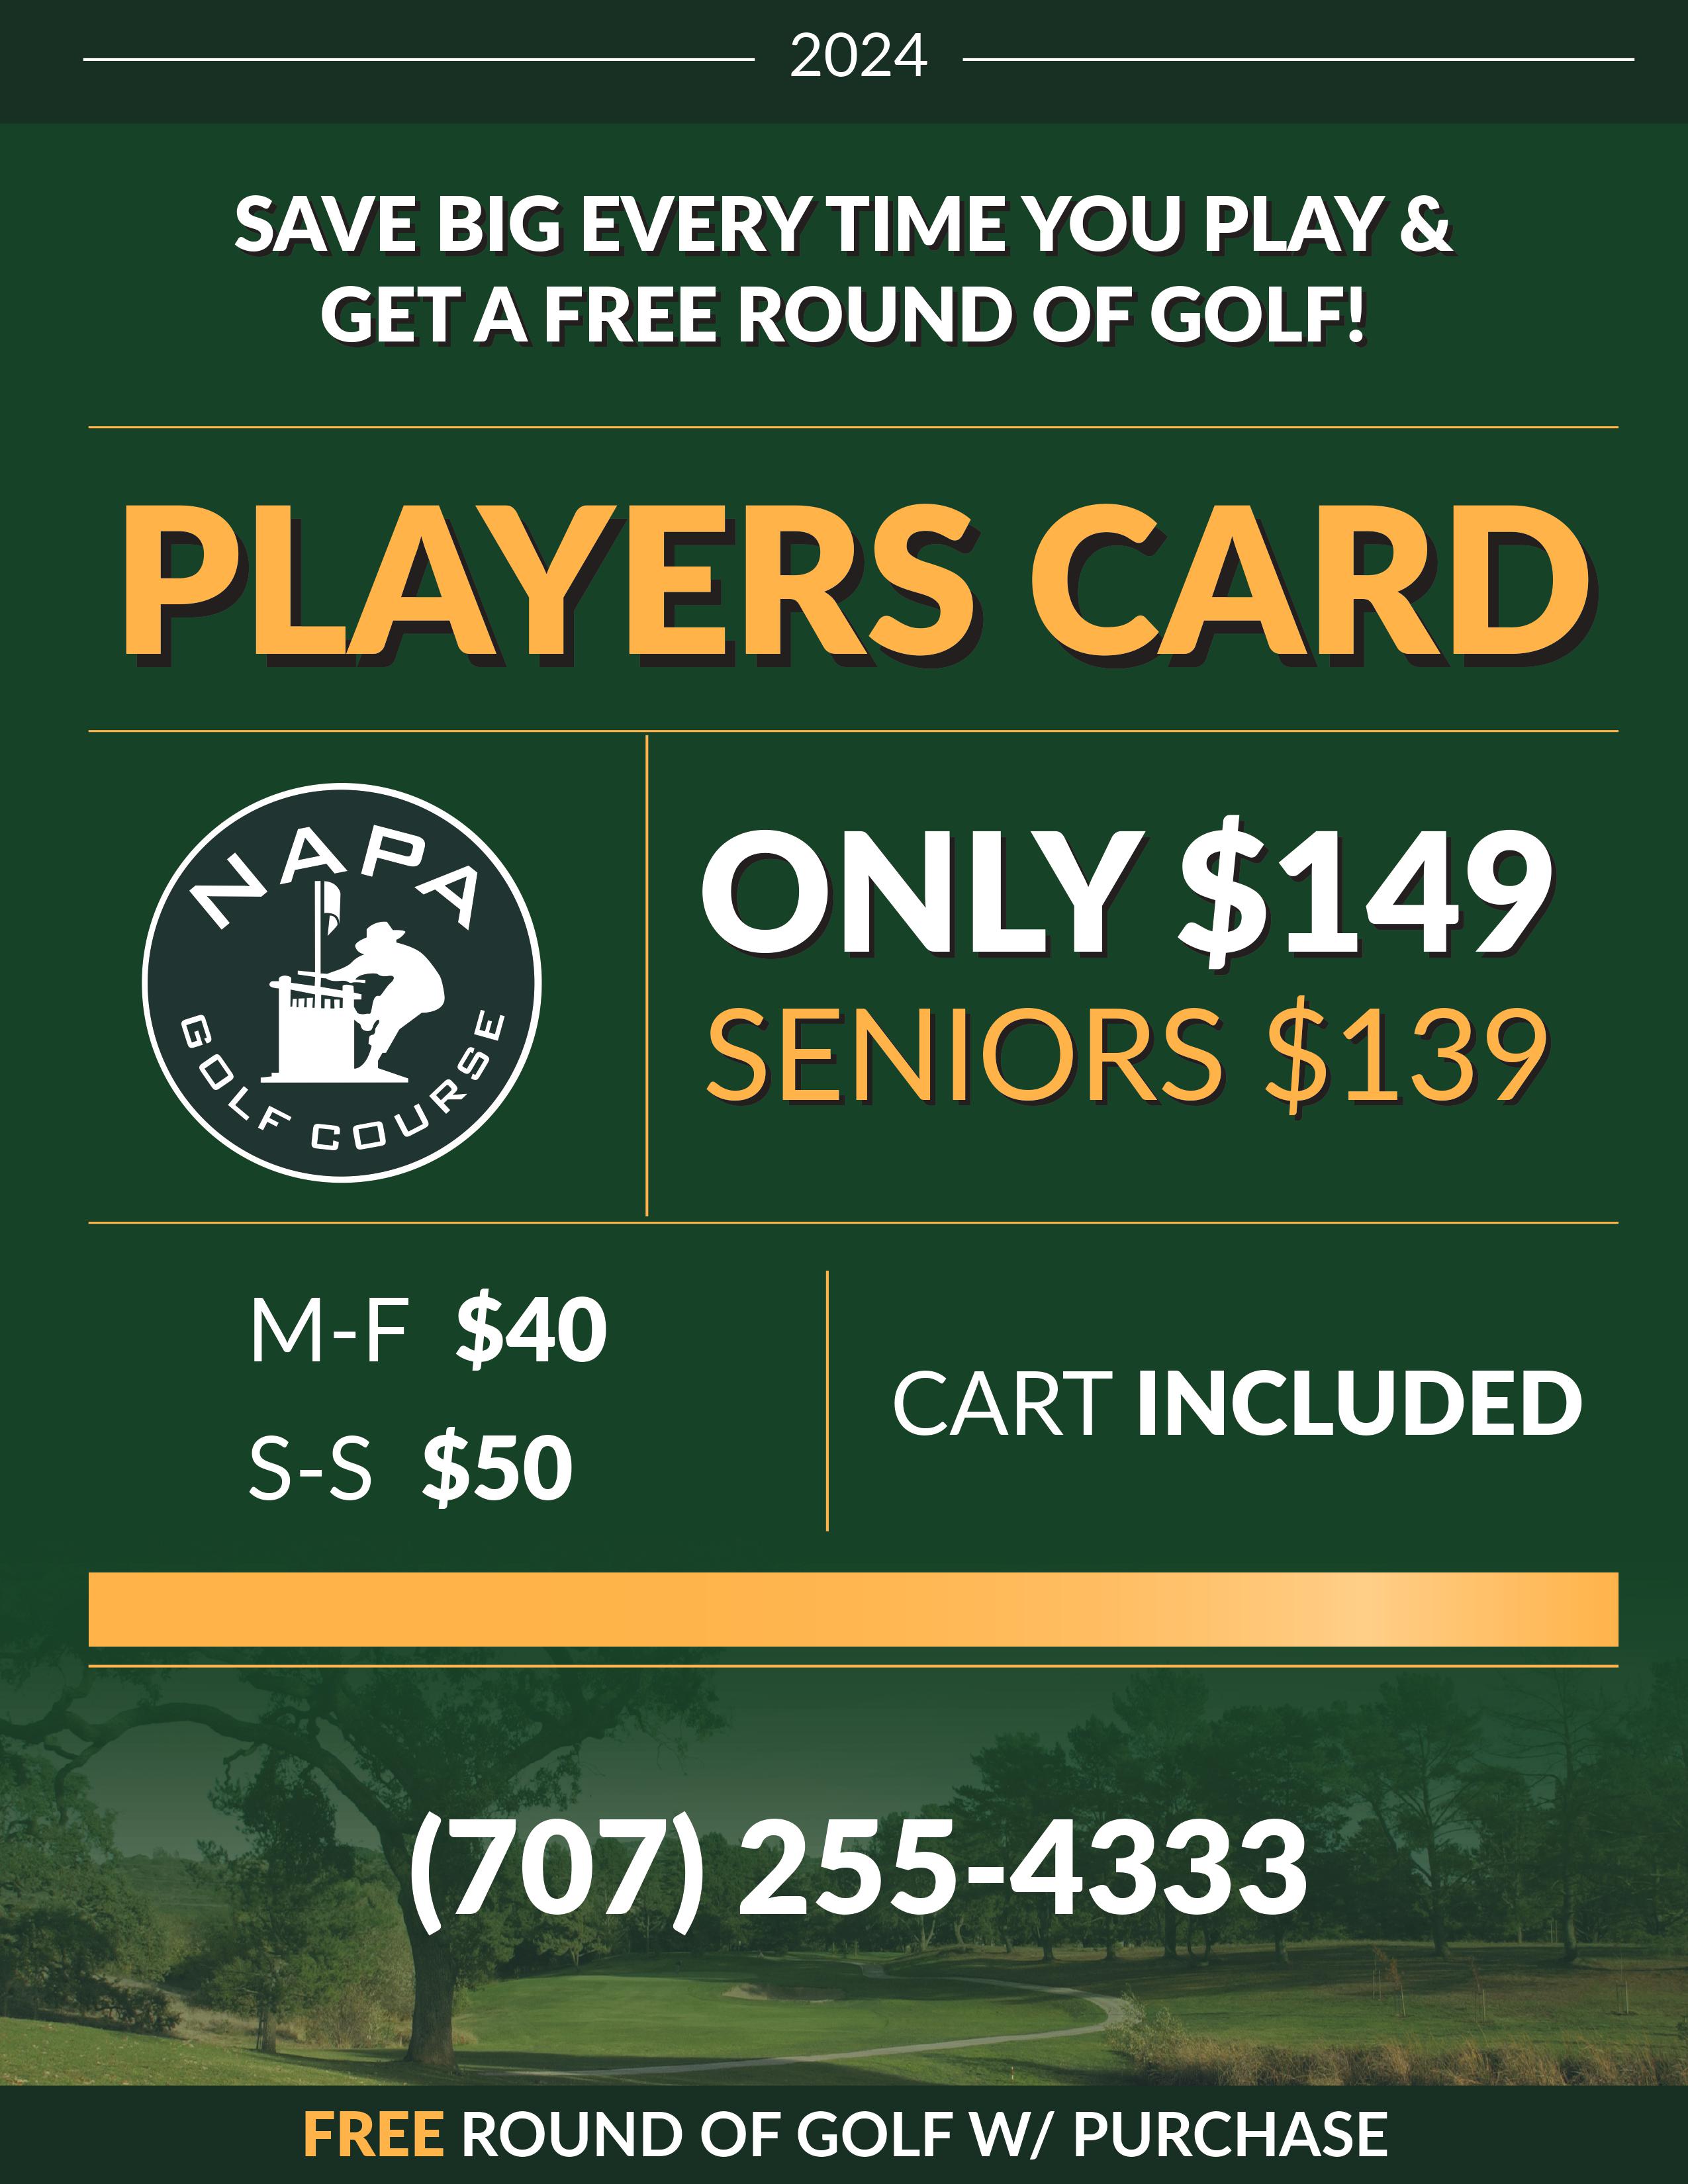 Players Card 2024 Version Of 2018 FLIER PROOF2 